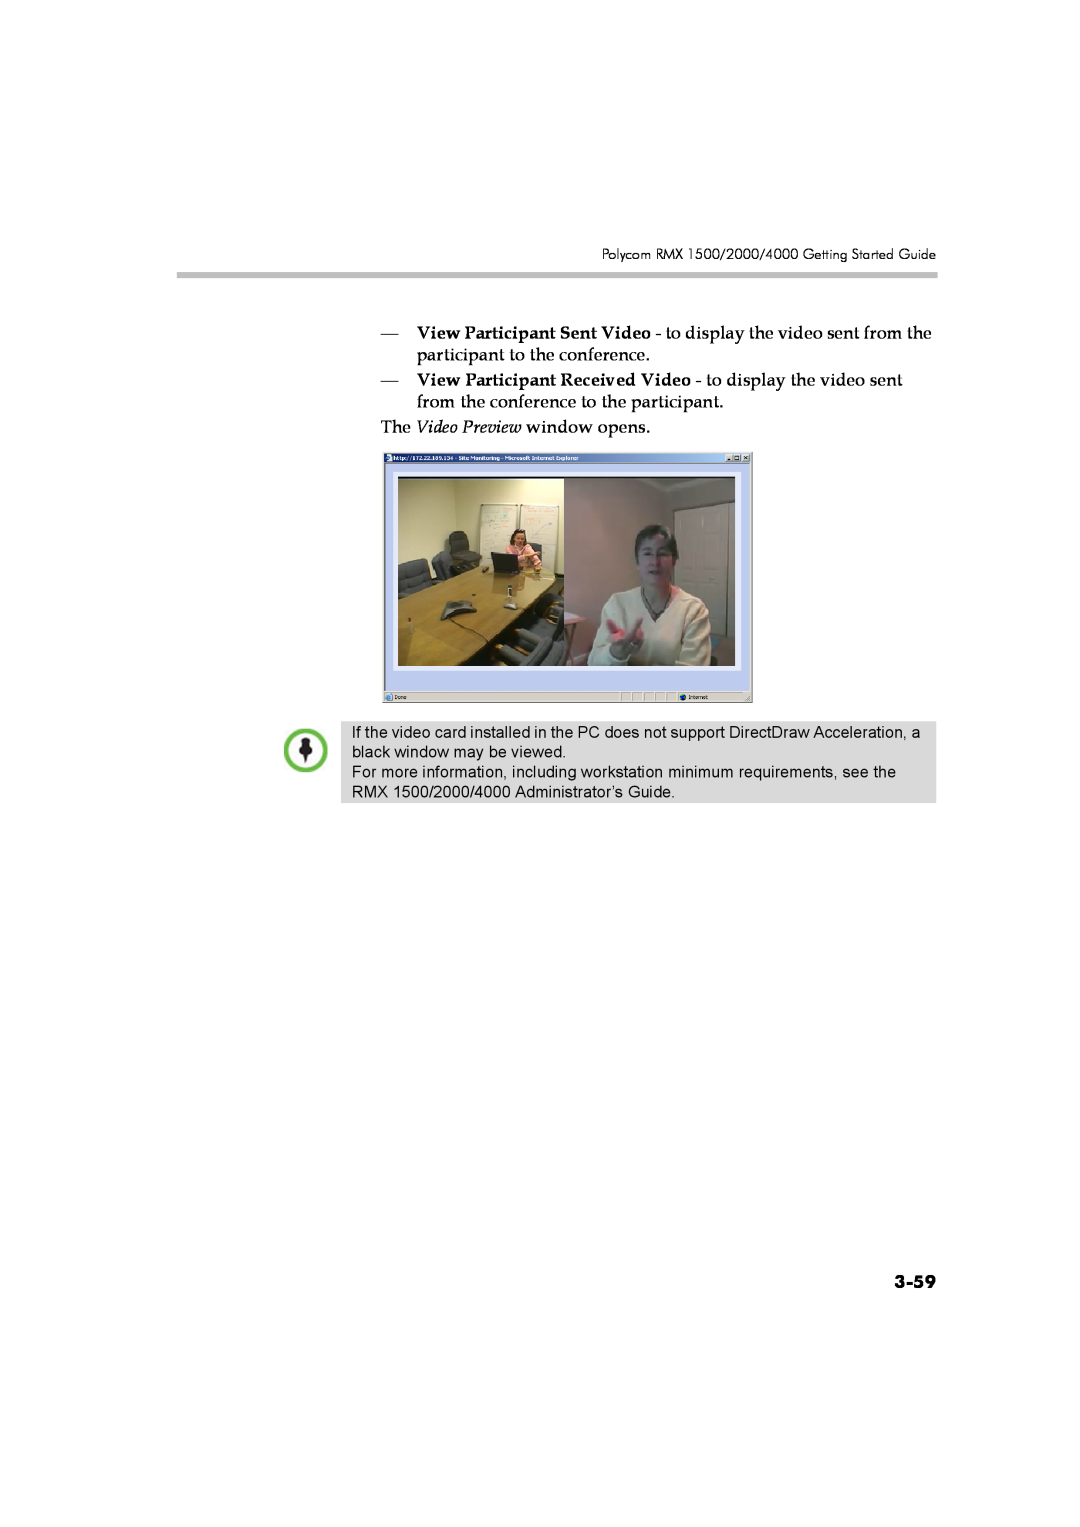 Polycom DOC2560B manual 3-59, The Video Preview window opens 